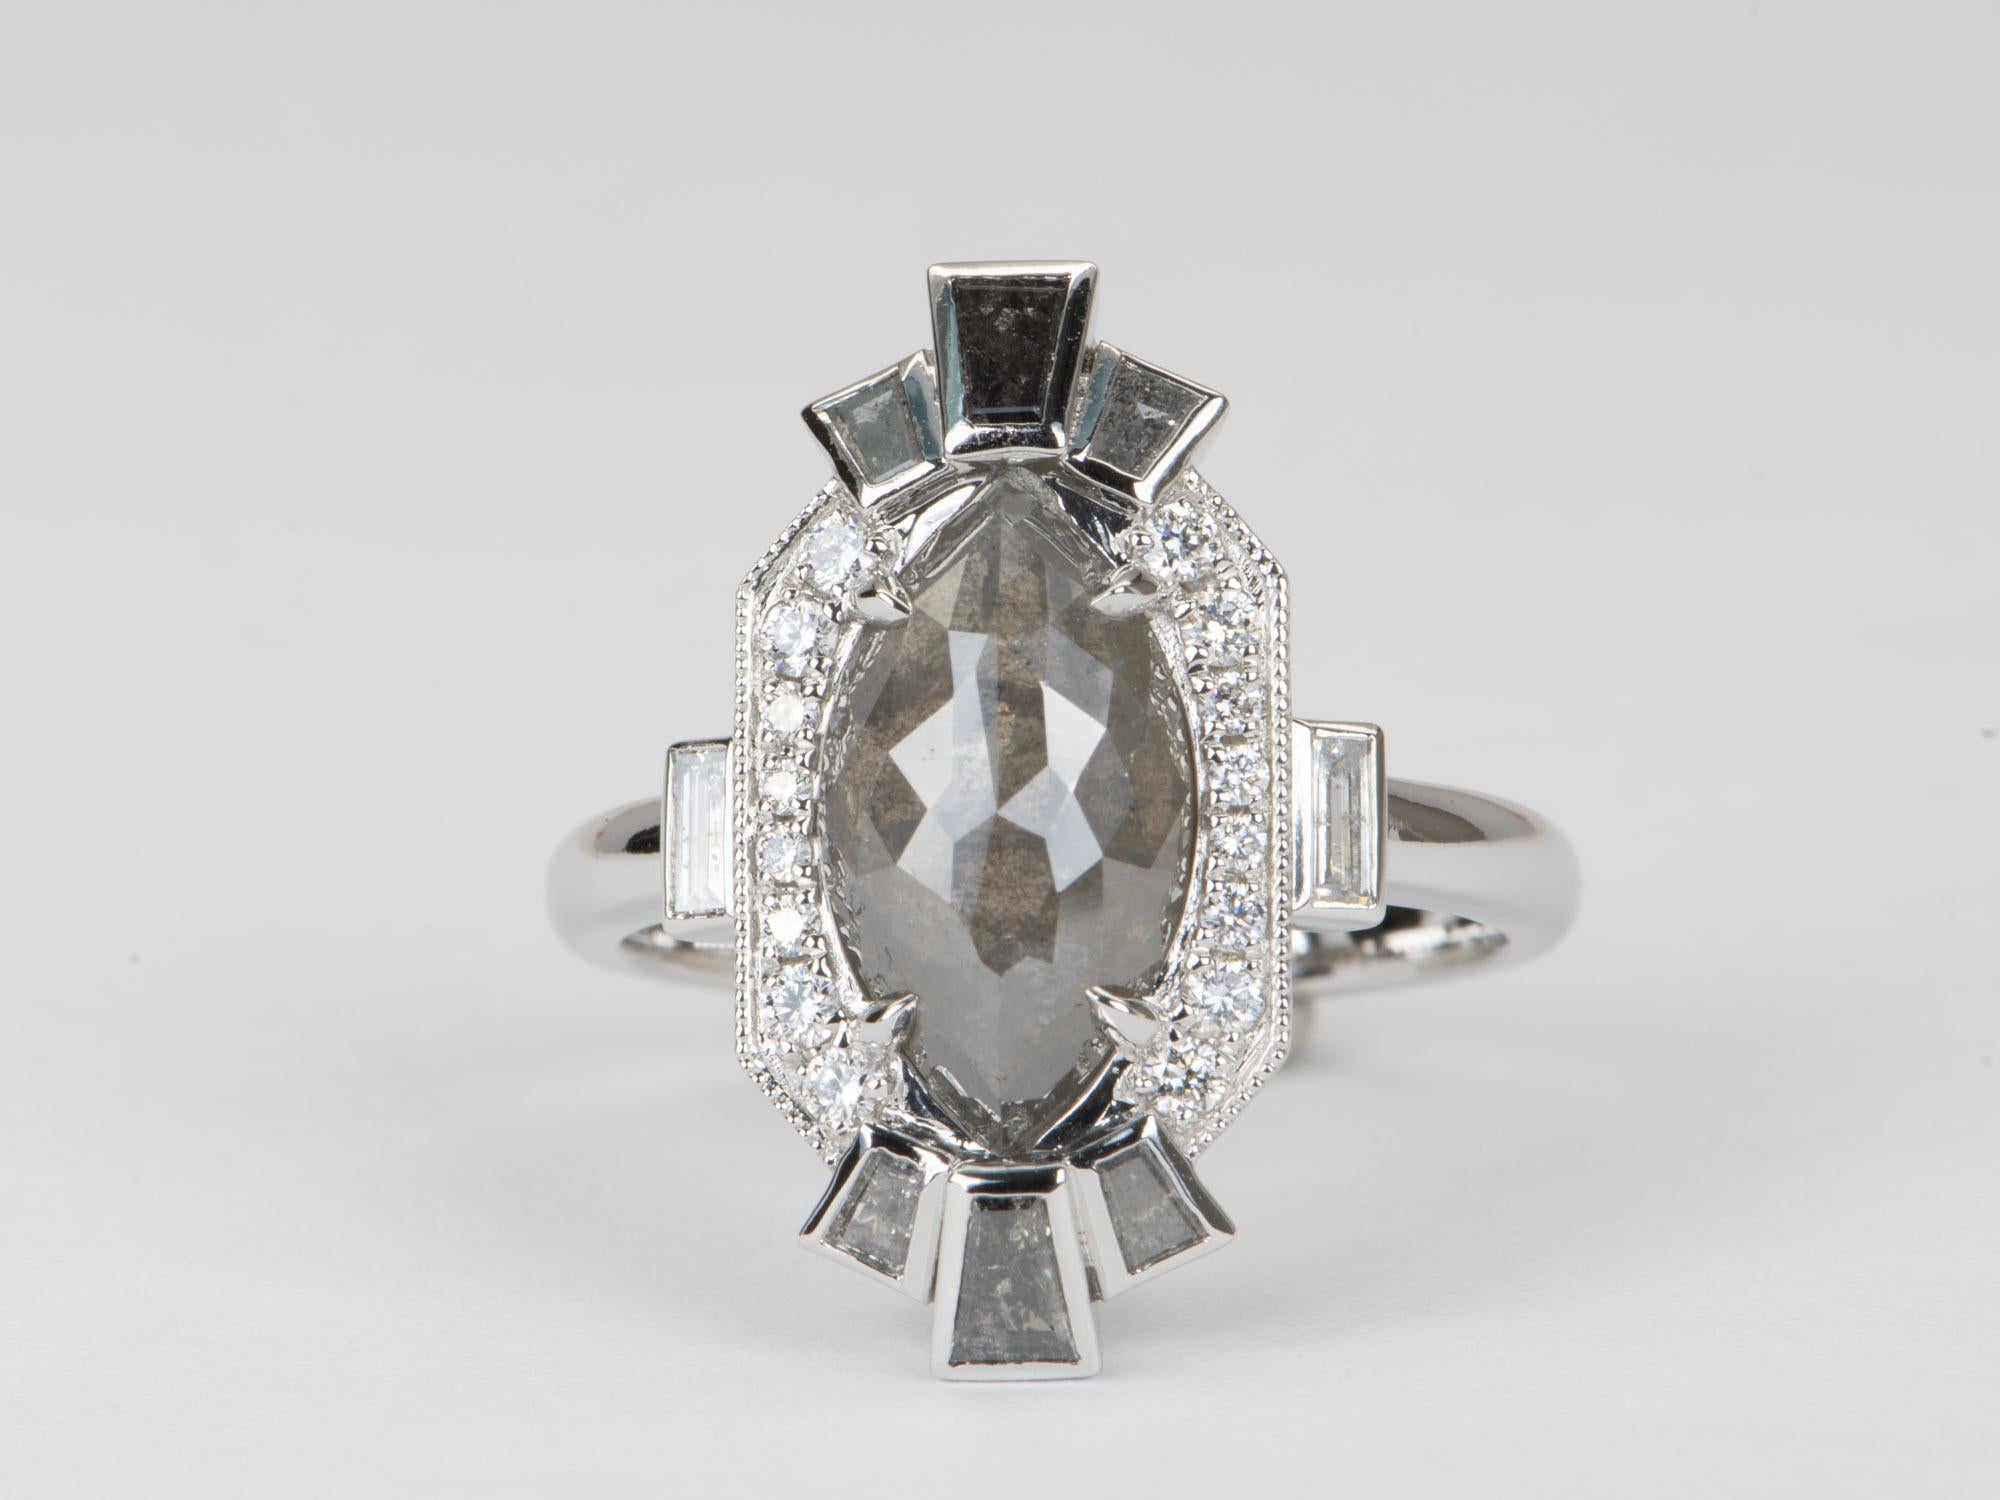 This one-of-a-kind statement ring boasts a 3.66ct salt and pepper diamond set in luxurious 14K white gold, surrounded by a unique halo of tapered baguette and round brilliant cut diamonds. The ring's stunning design makes it an exquisite piece of